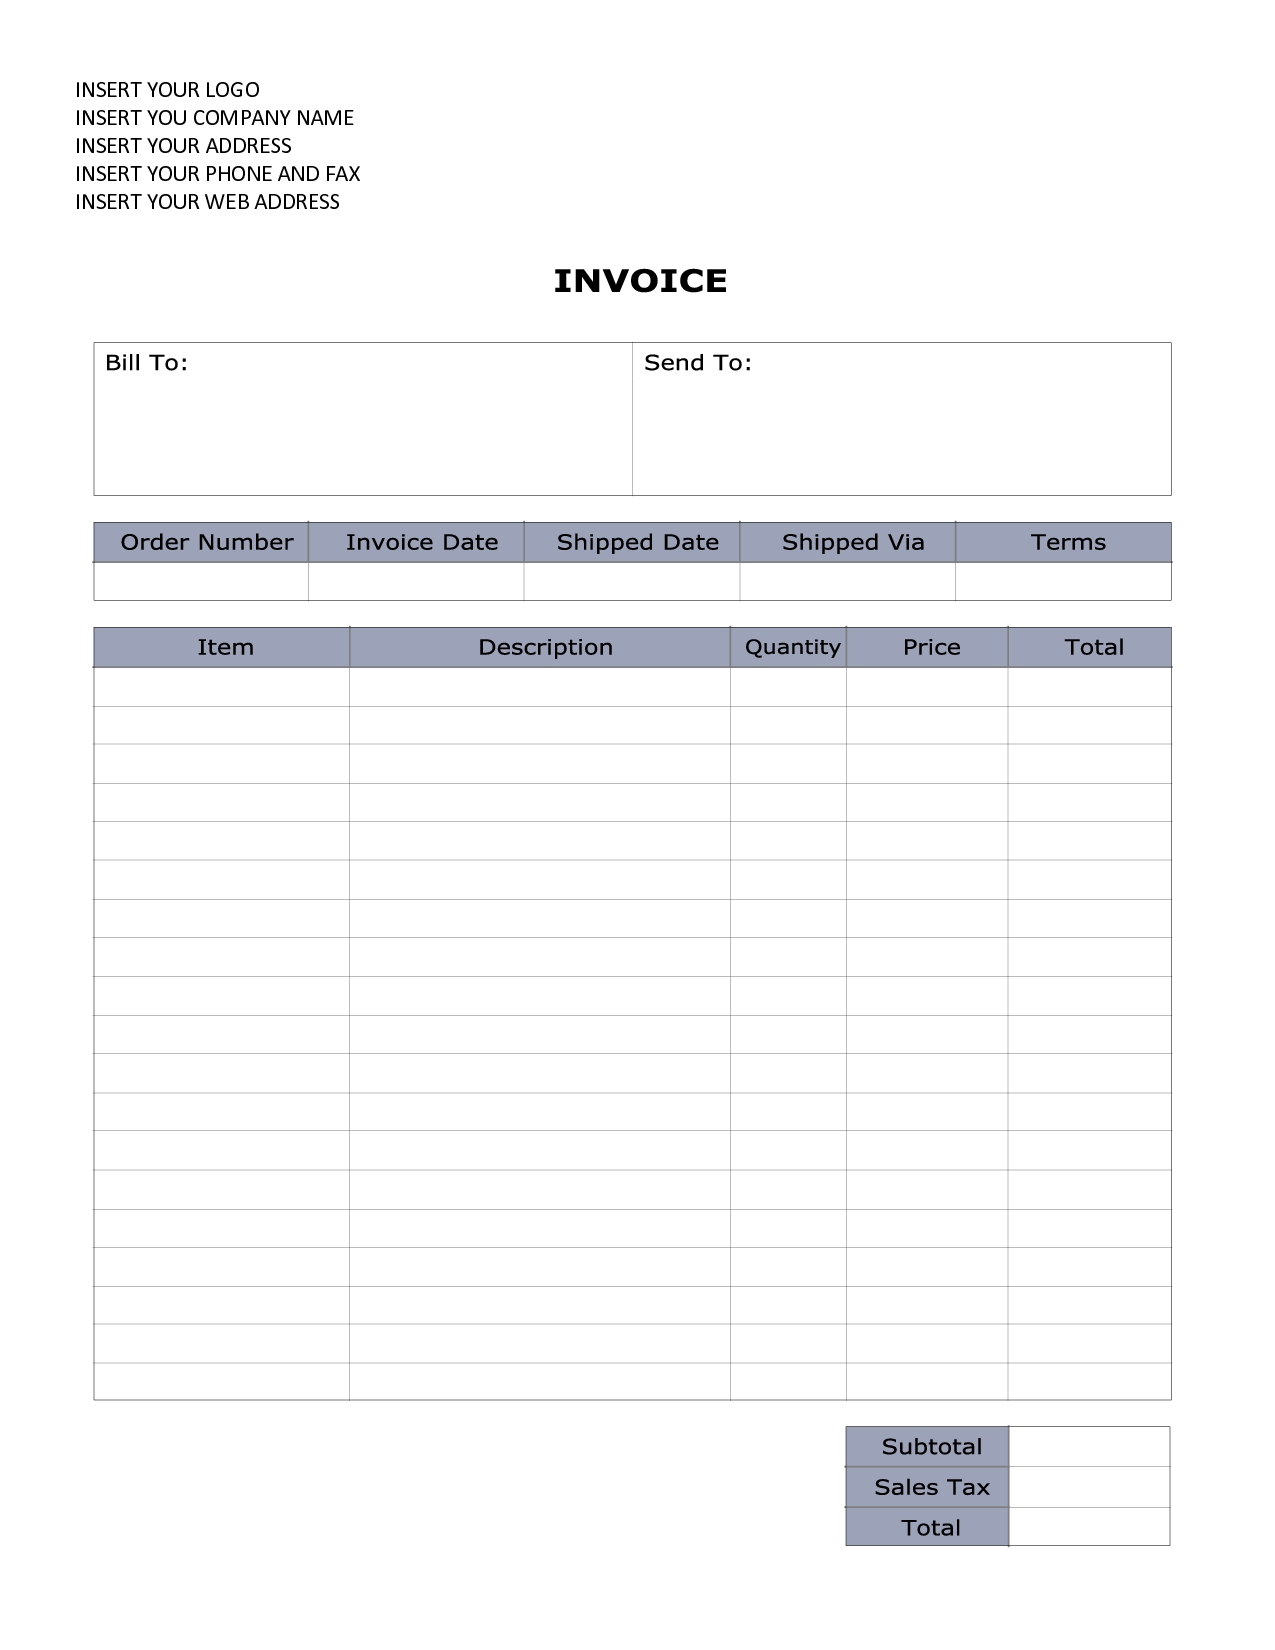 sample invoices in word format 10 examples and the information in sales invoice sample word 1275 X 1650